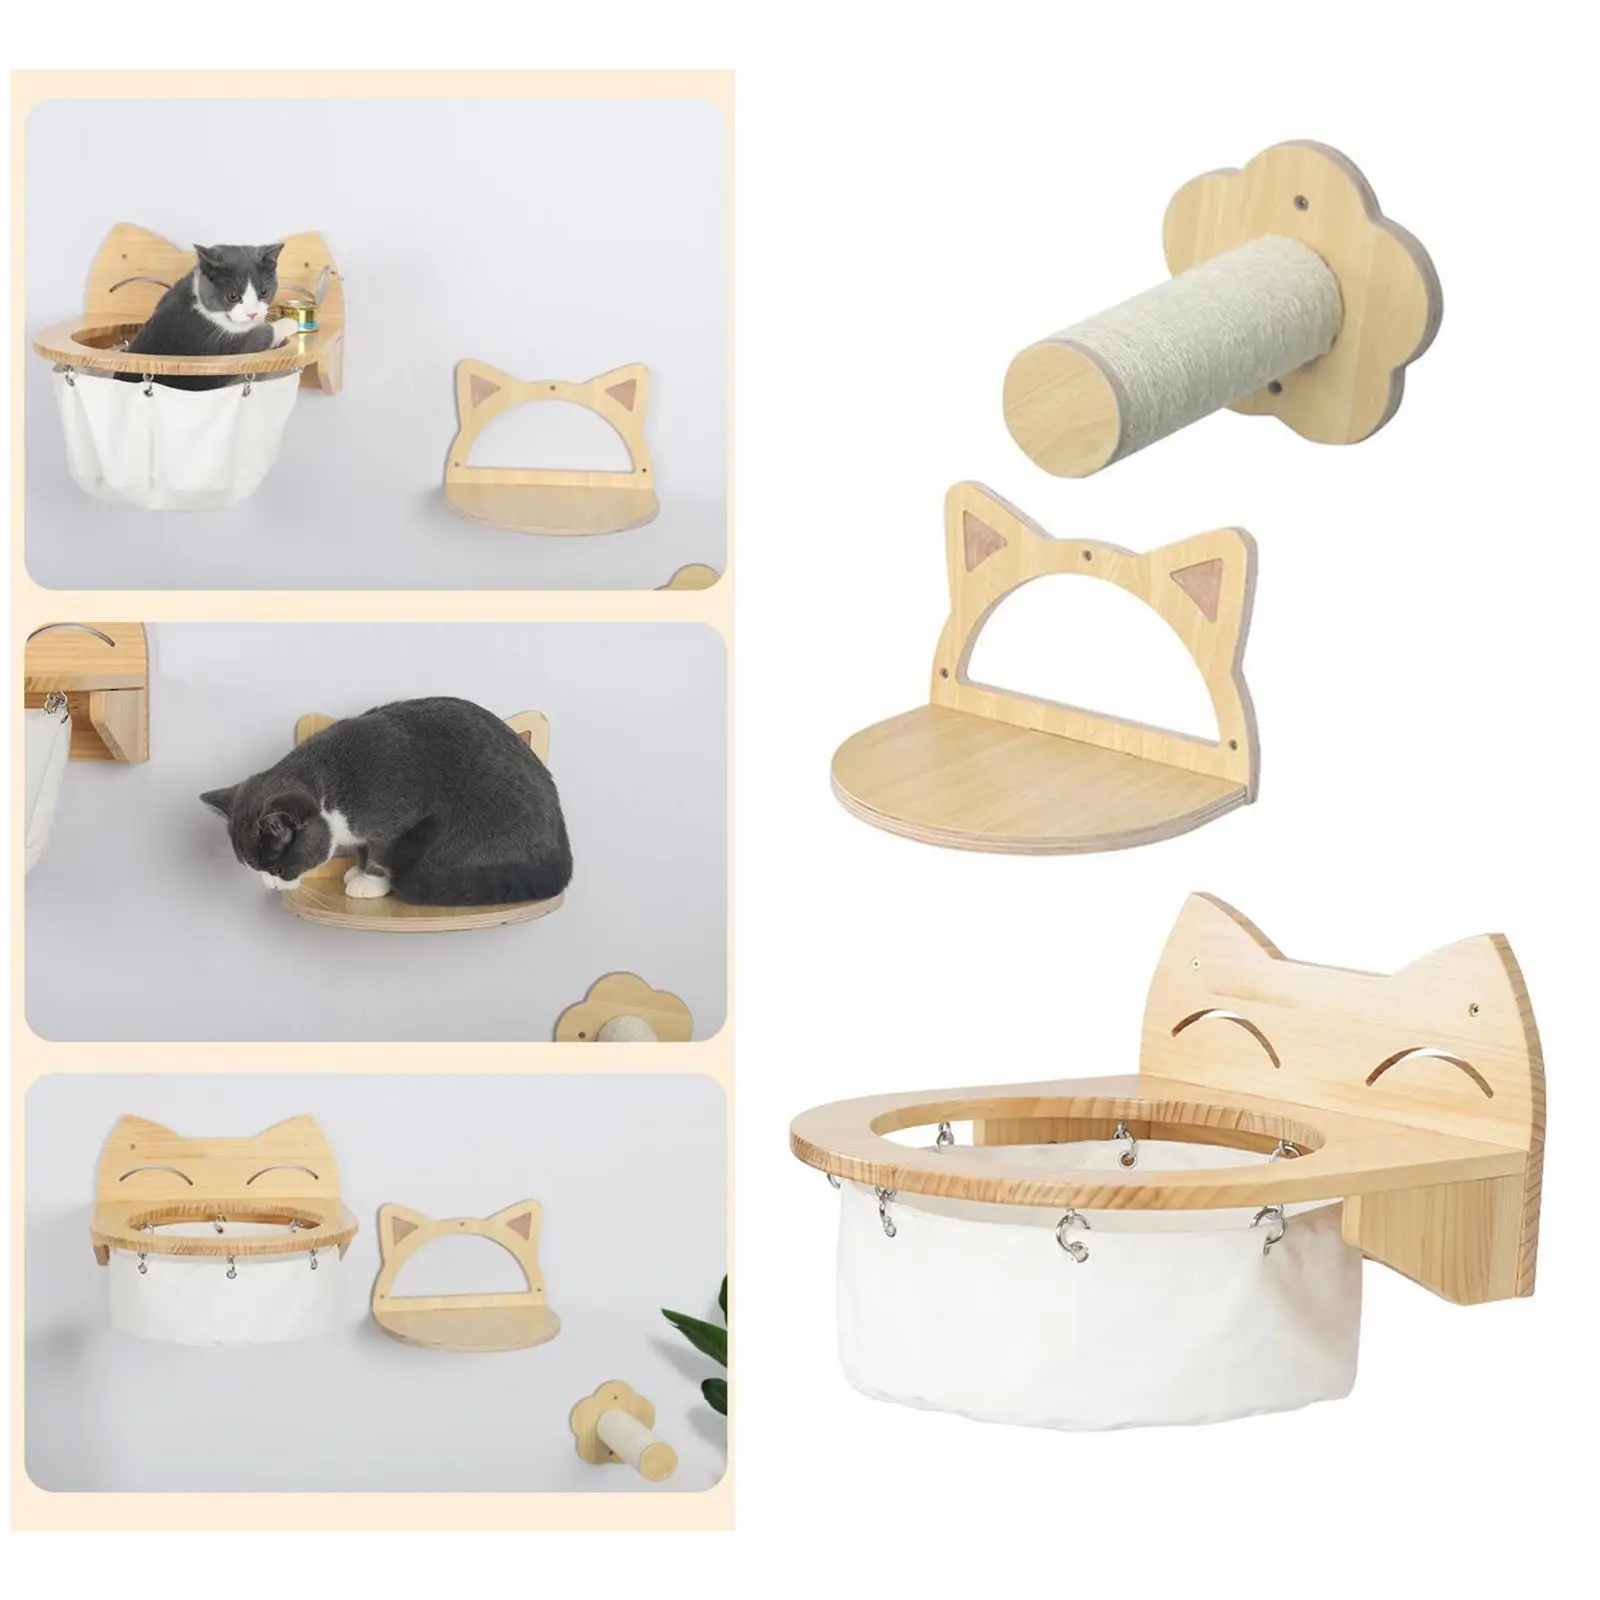 3x Kitten Wall Bed Cat Hammock Perches Wall Mounted for Sleeping Playing Climbing Lounging Cats Wall Furniture Activity Centre